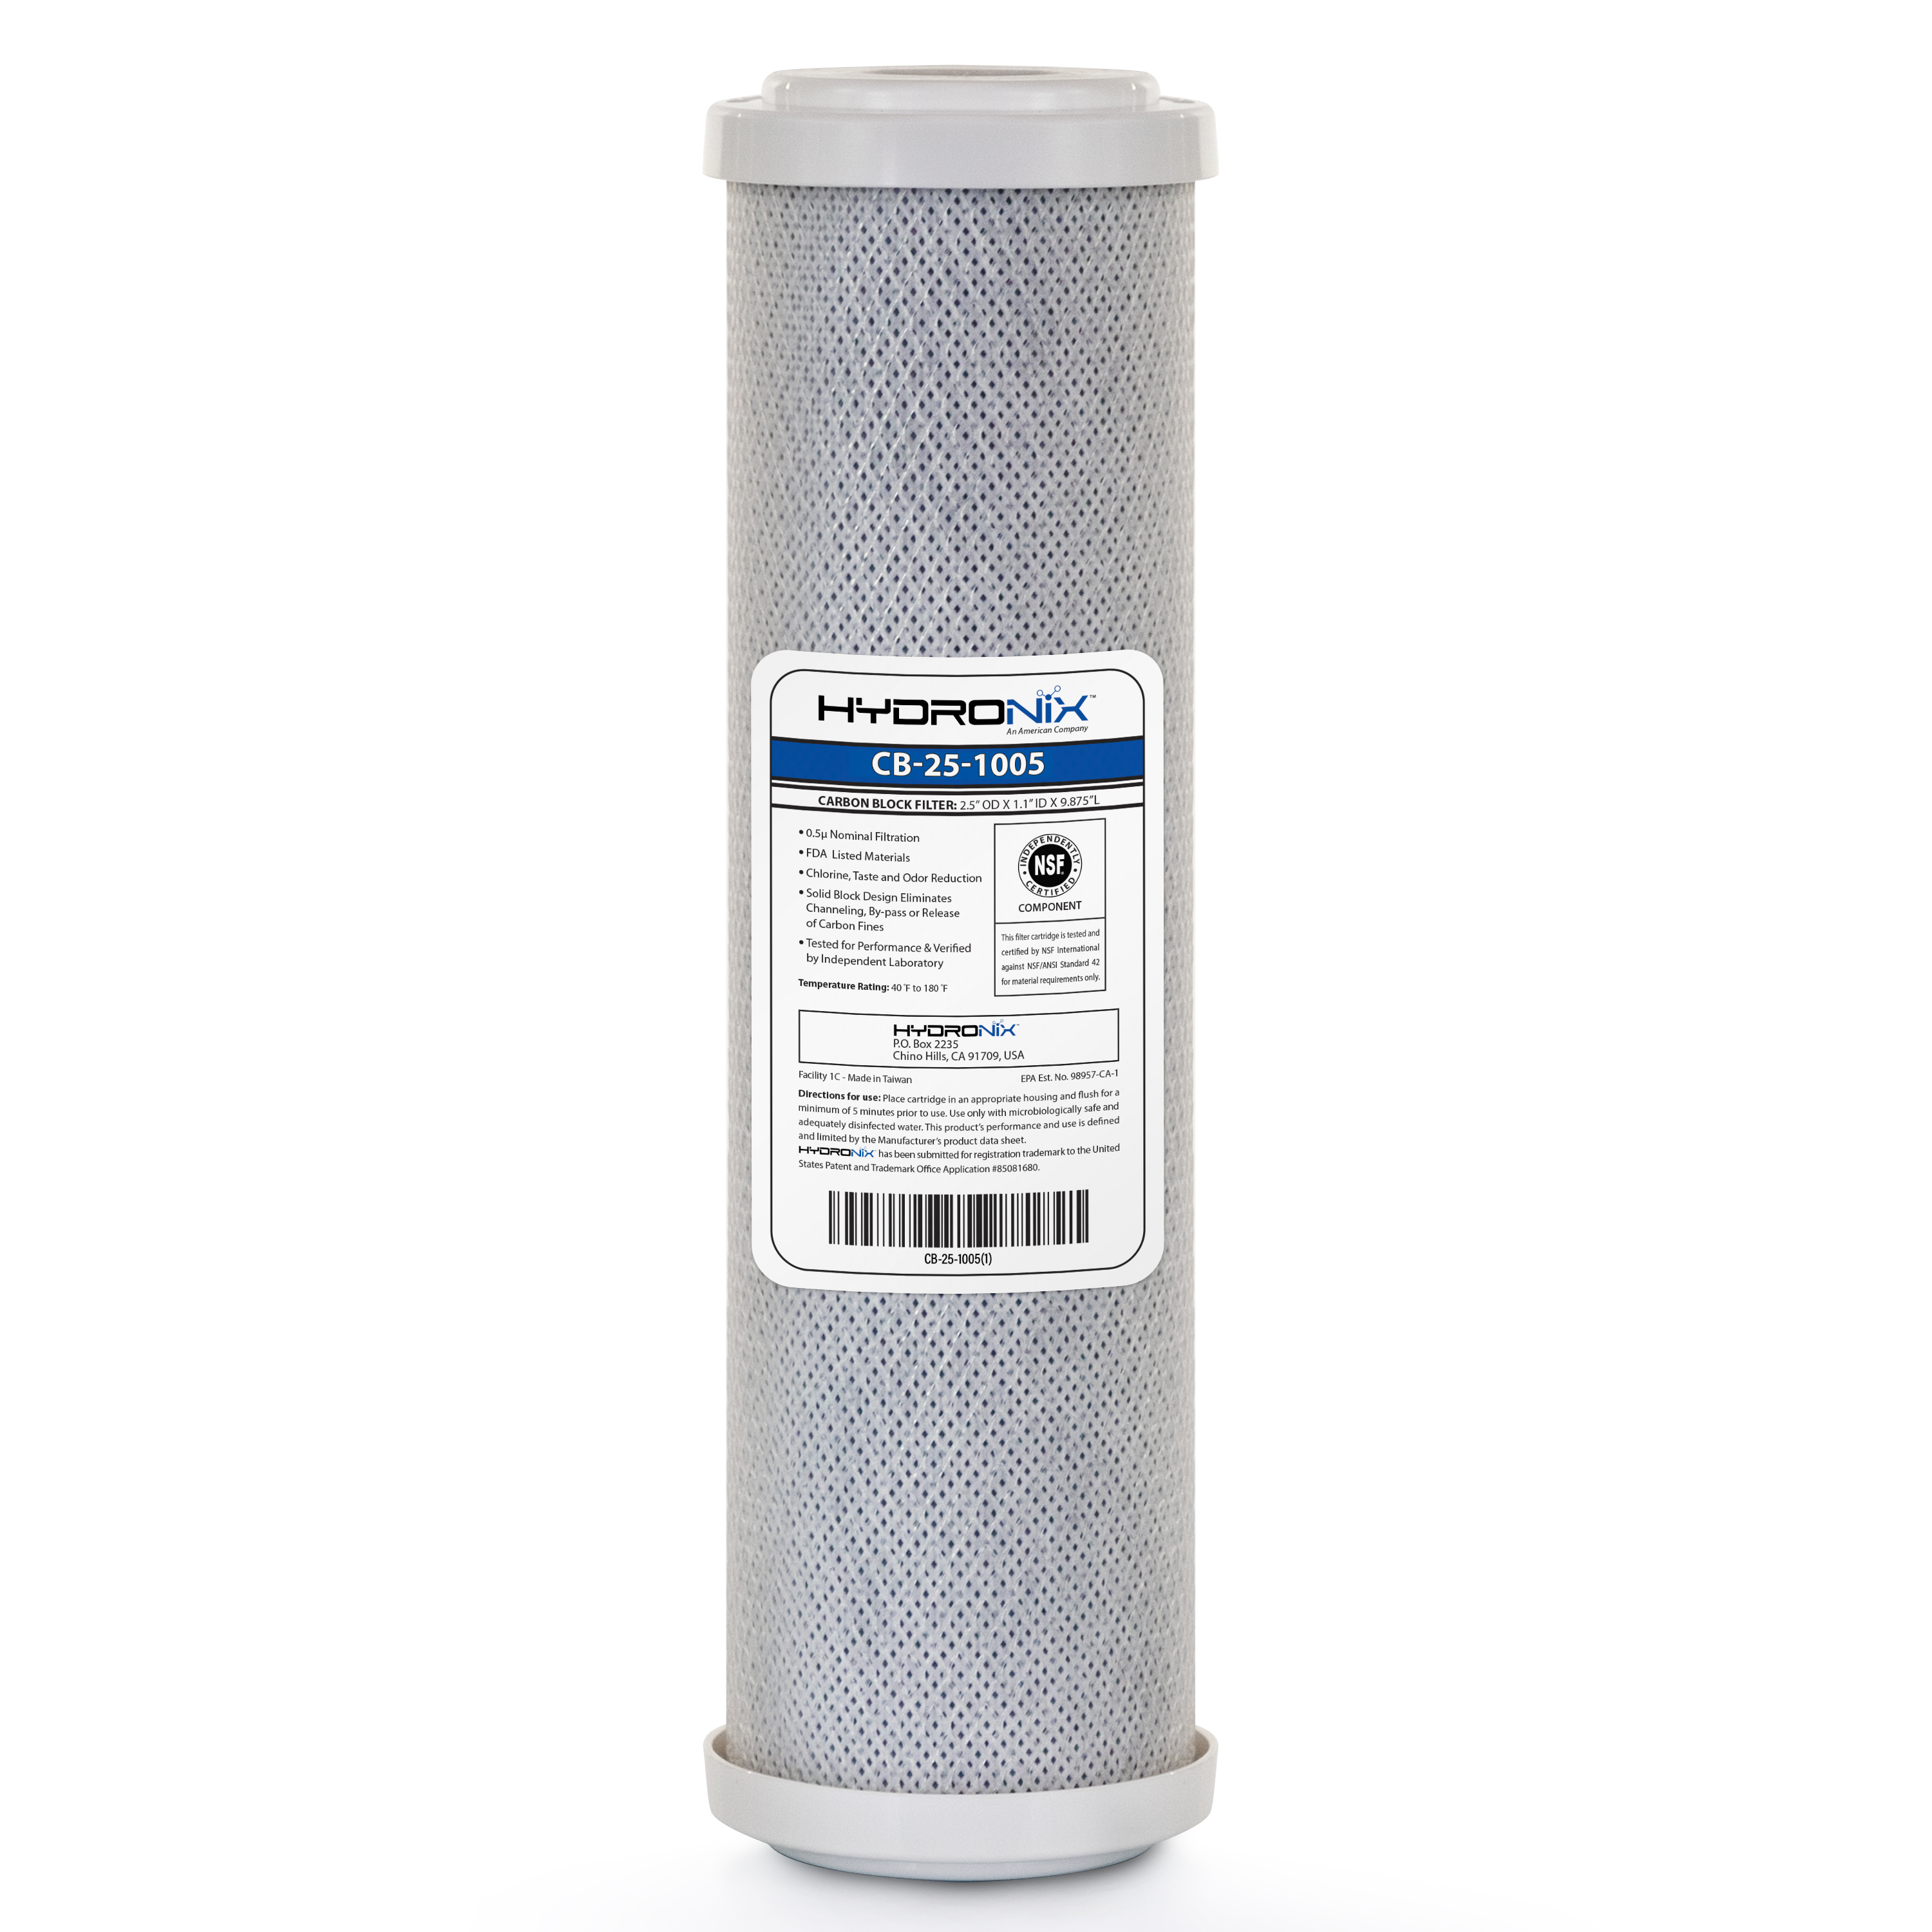 Hydronix CB-25-1005 Whole House RO & Drinking Systems NSF Coconut Carbon Block Water Filter 2.5 x 10 - 5 micron